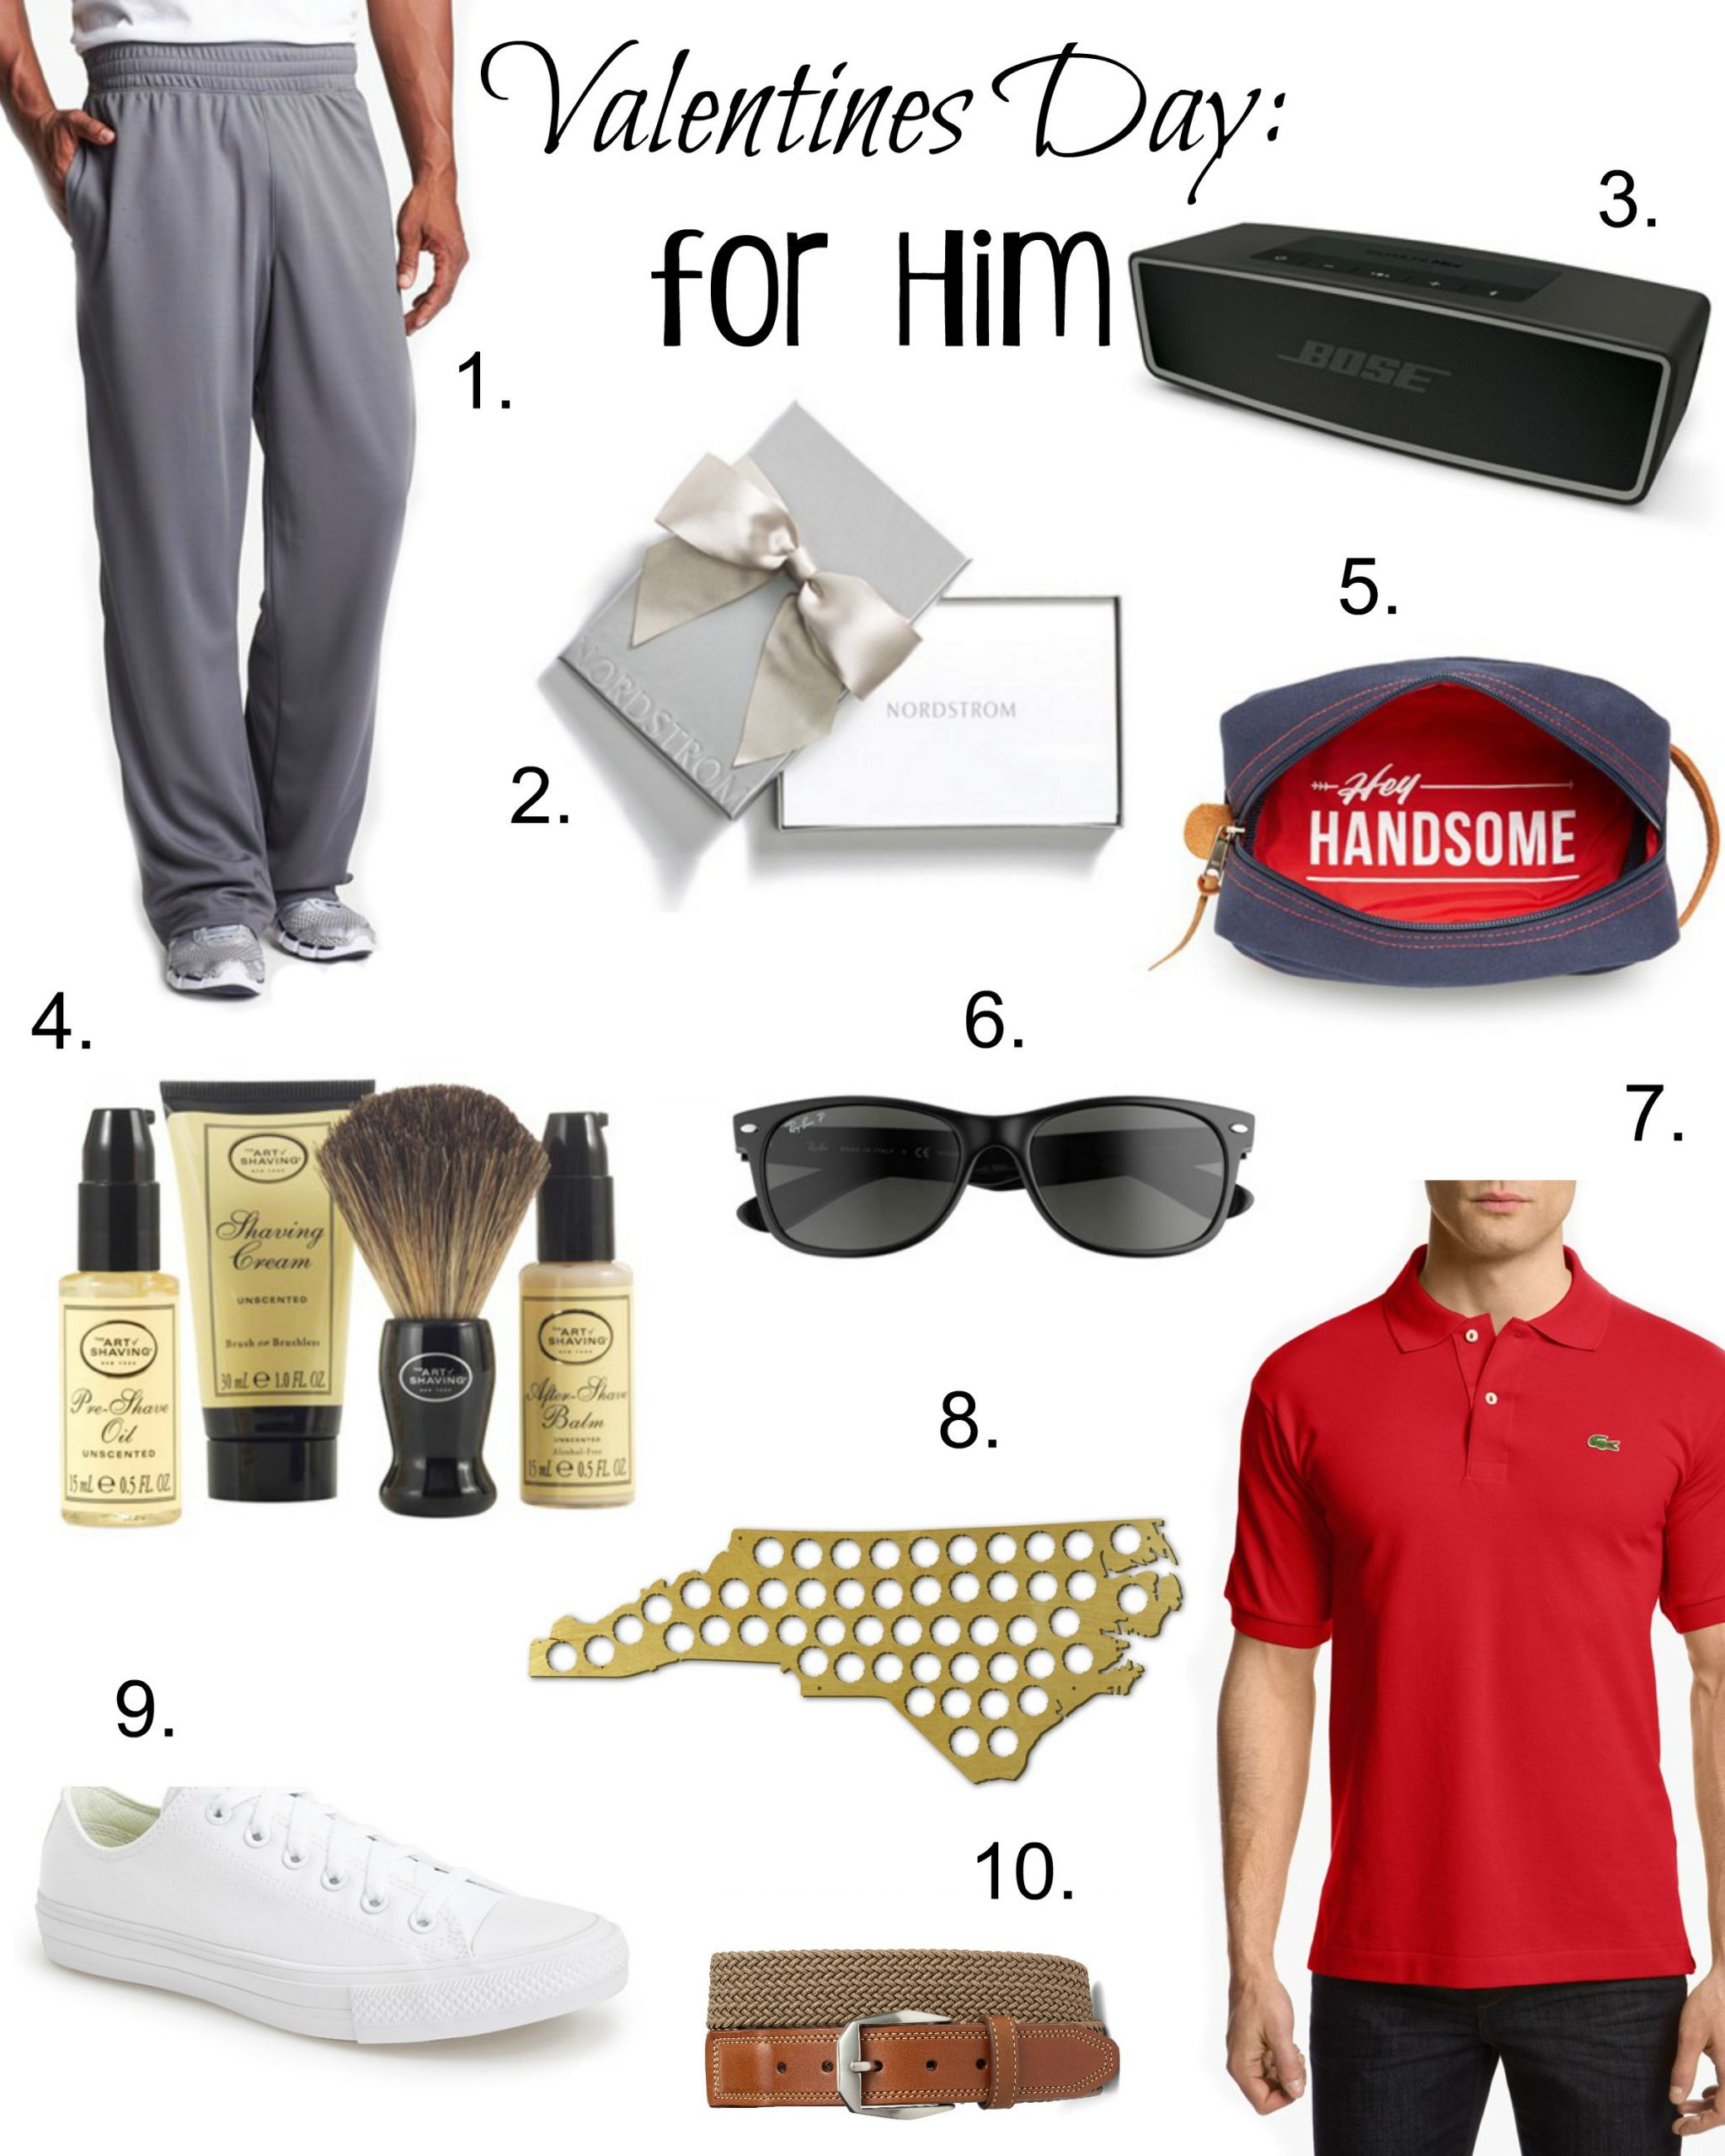 Great Valentines Day Gifts For Him
 Top 10 Valentines Day Gifts For Him